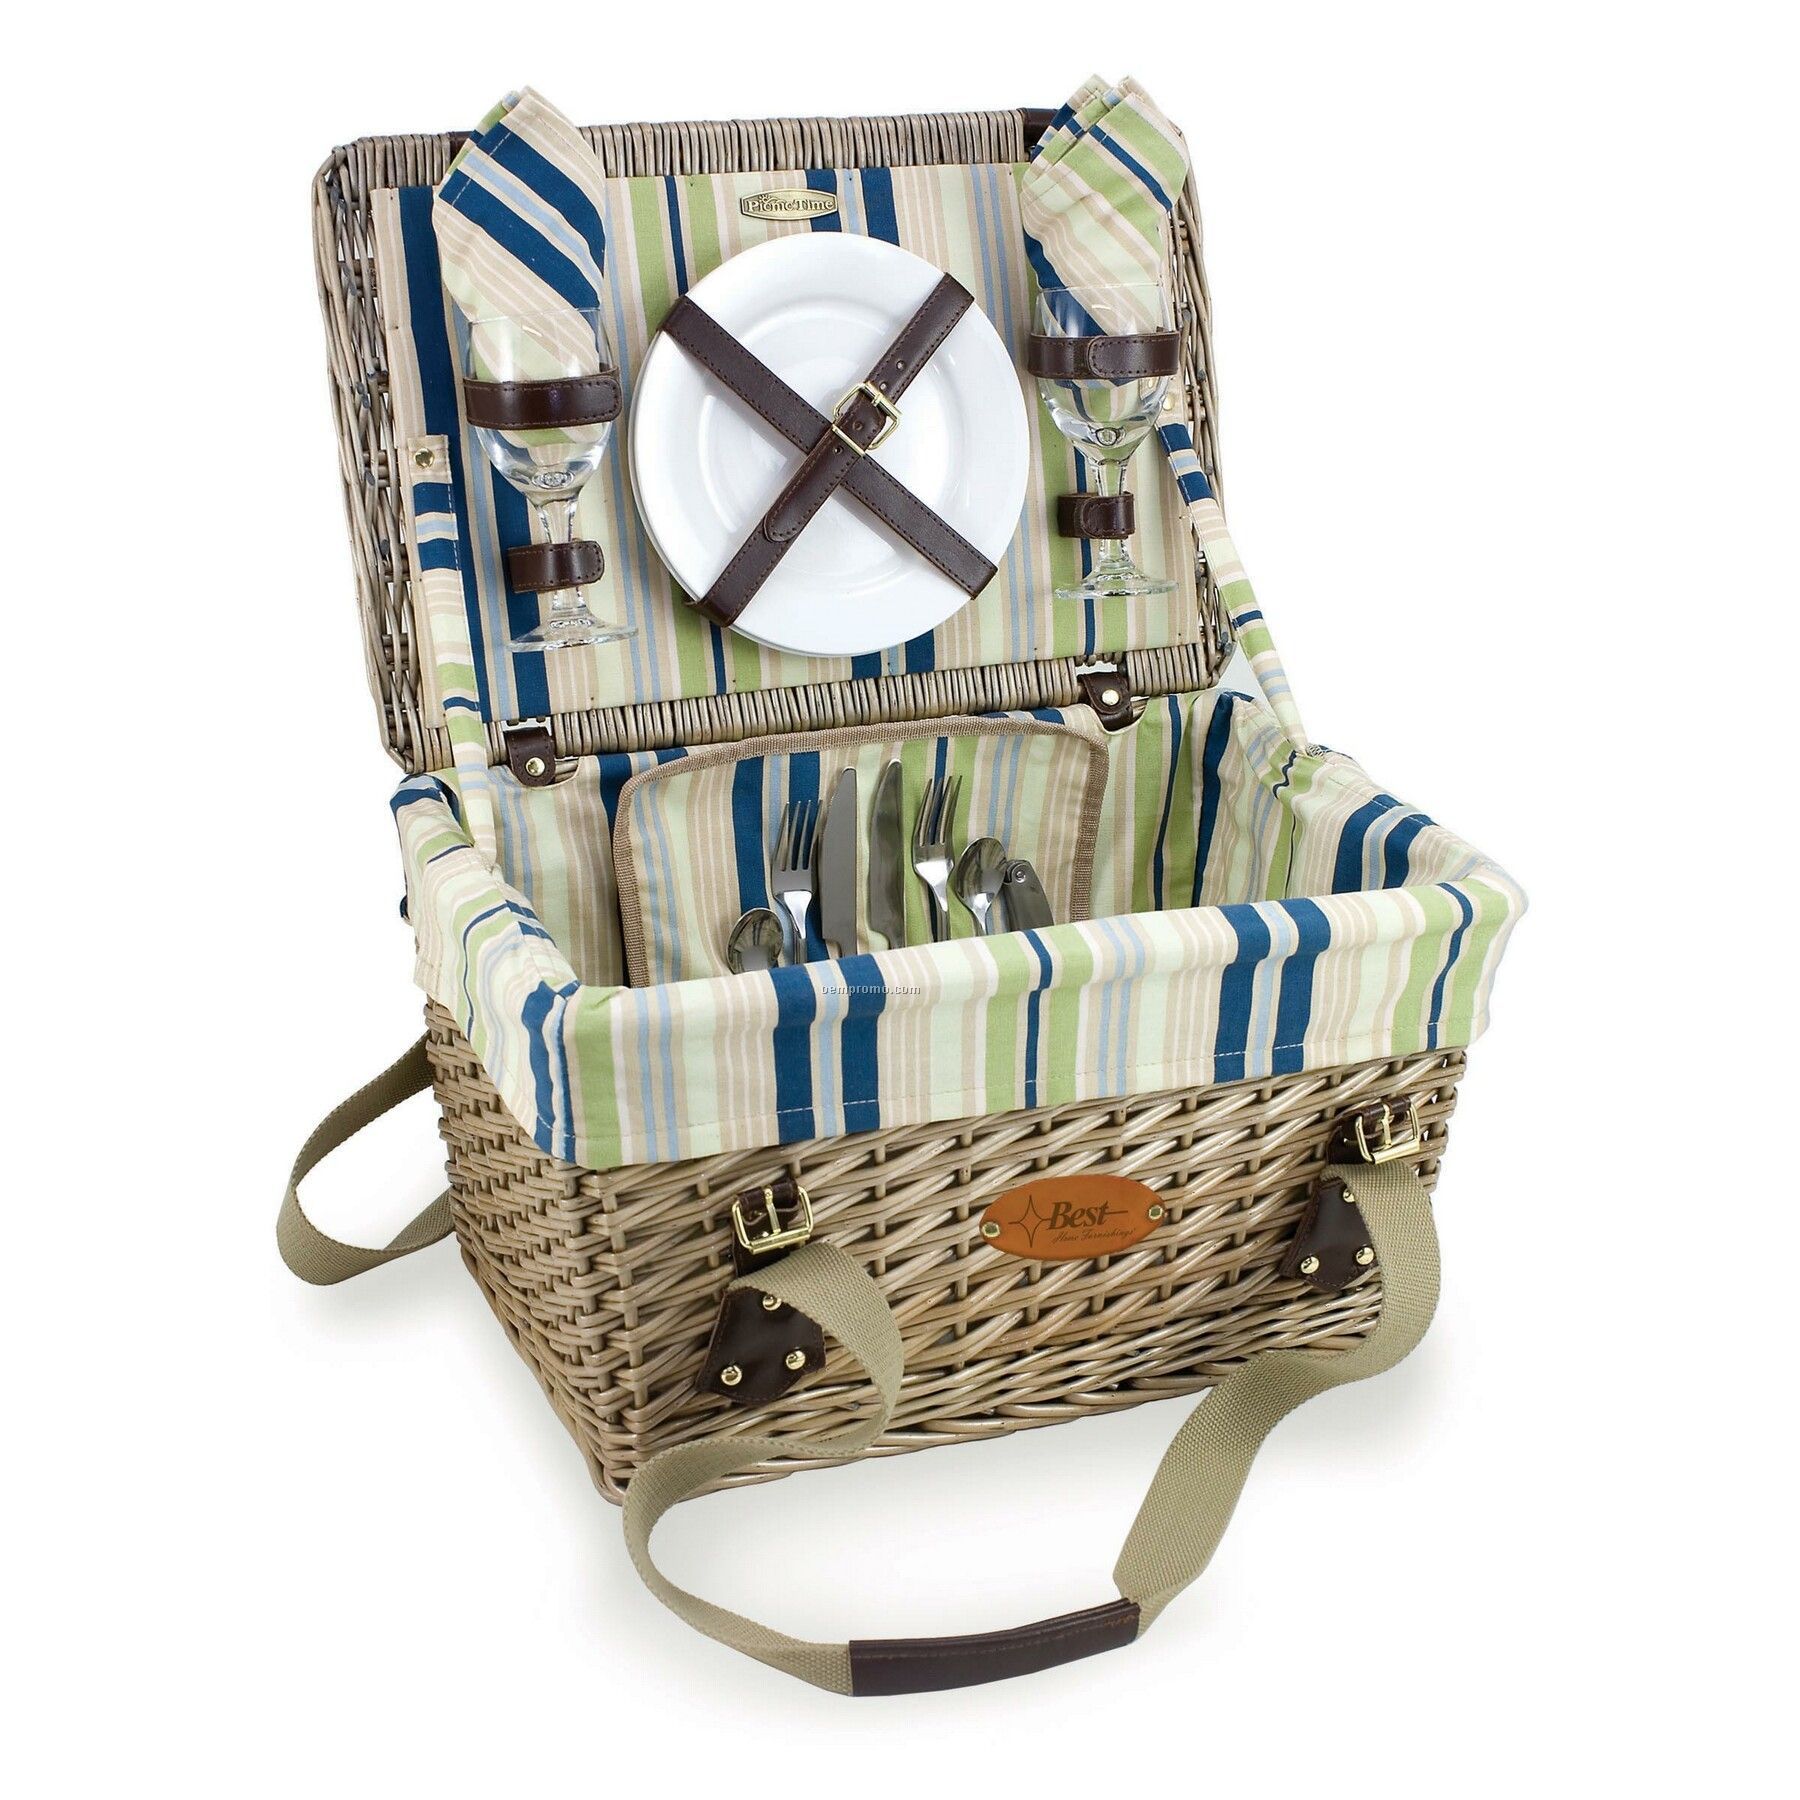 Willowbrook English Style 18" Picnic Basket W/Service For 2 (Stripe Lining)